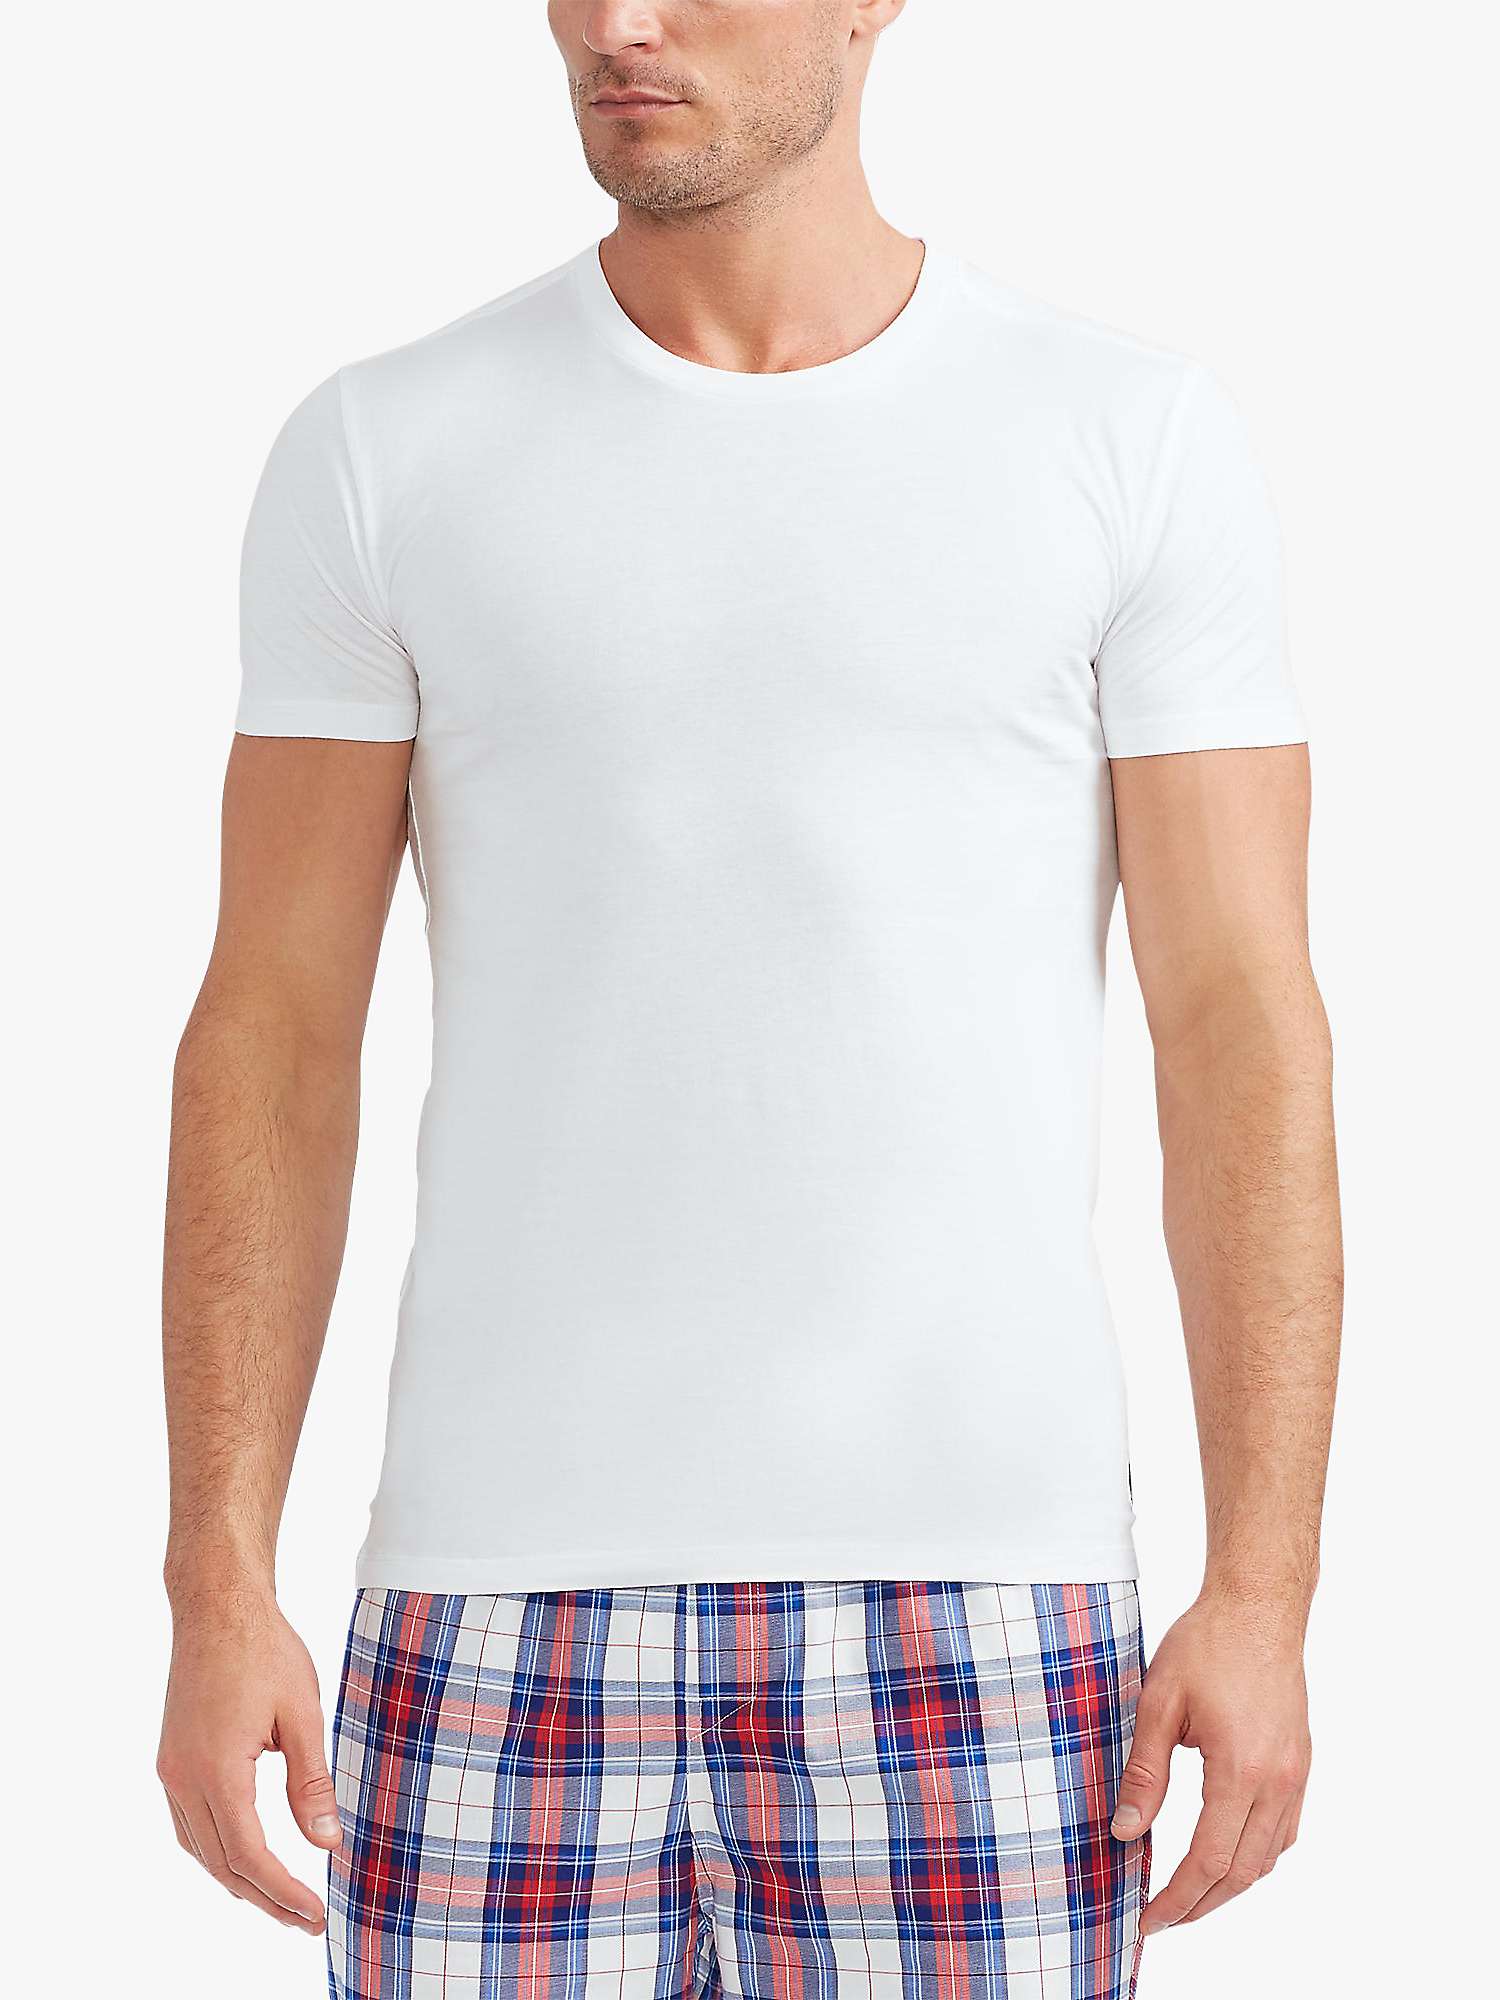 Buy Polo Ralph Lauren Cotton Slim Fit Crew Neck Lounge T-Shirt, Pack of 3 Online at johnlewis.com